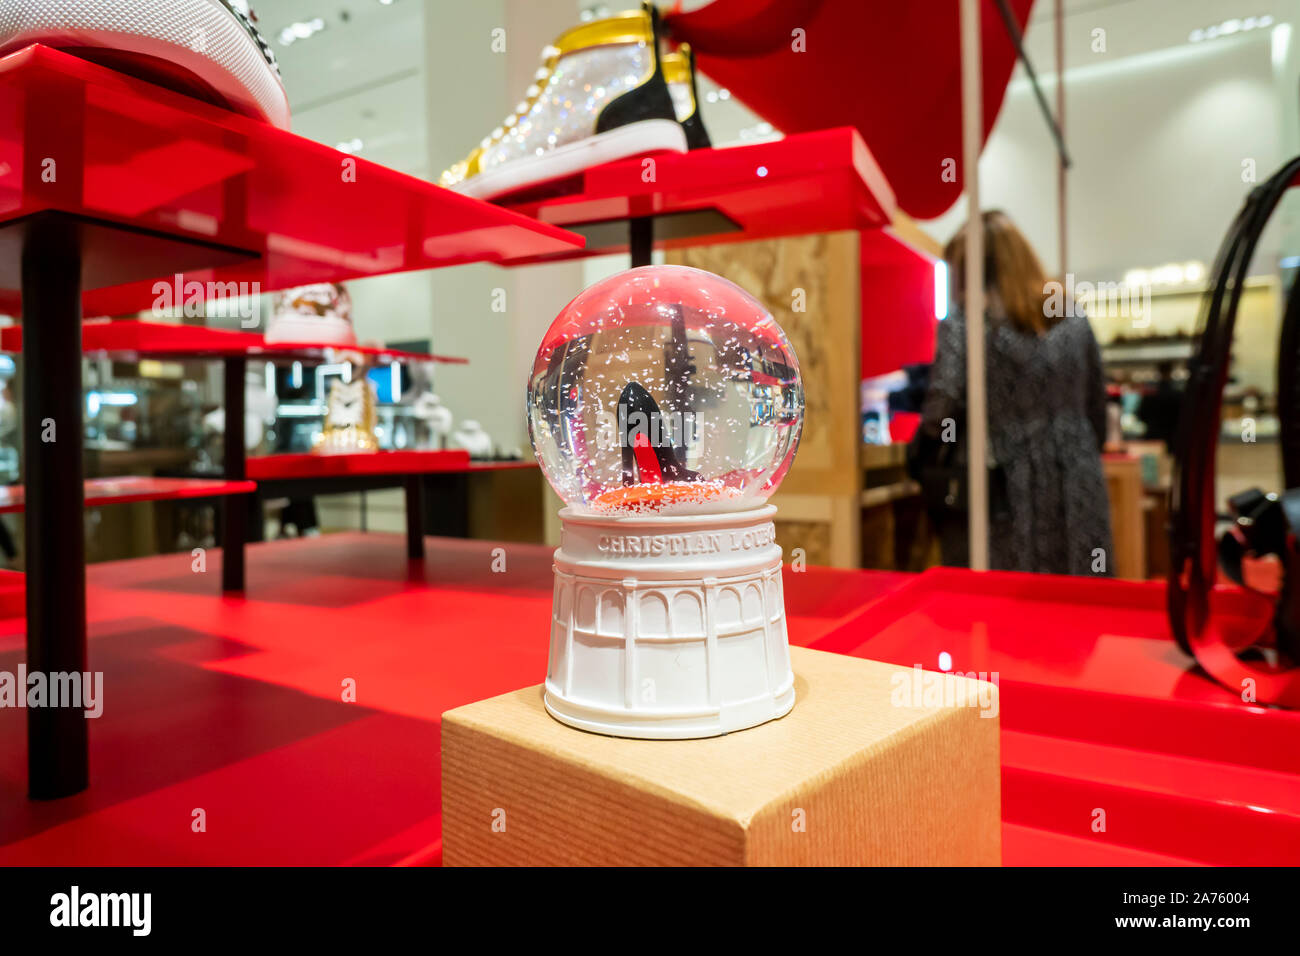 Christian Louboutin boutique within the new Nordstrom Department Store on  West 57th Street in Midtown Manhattan